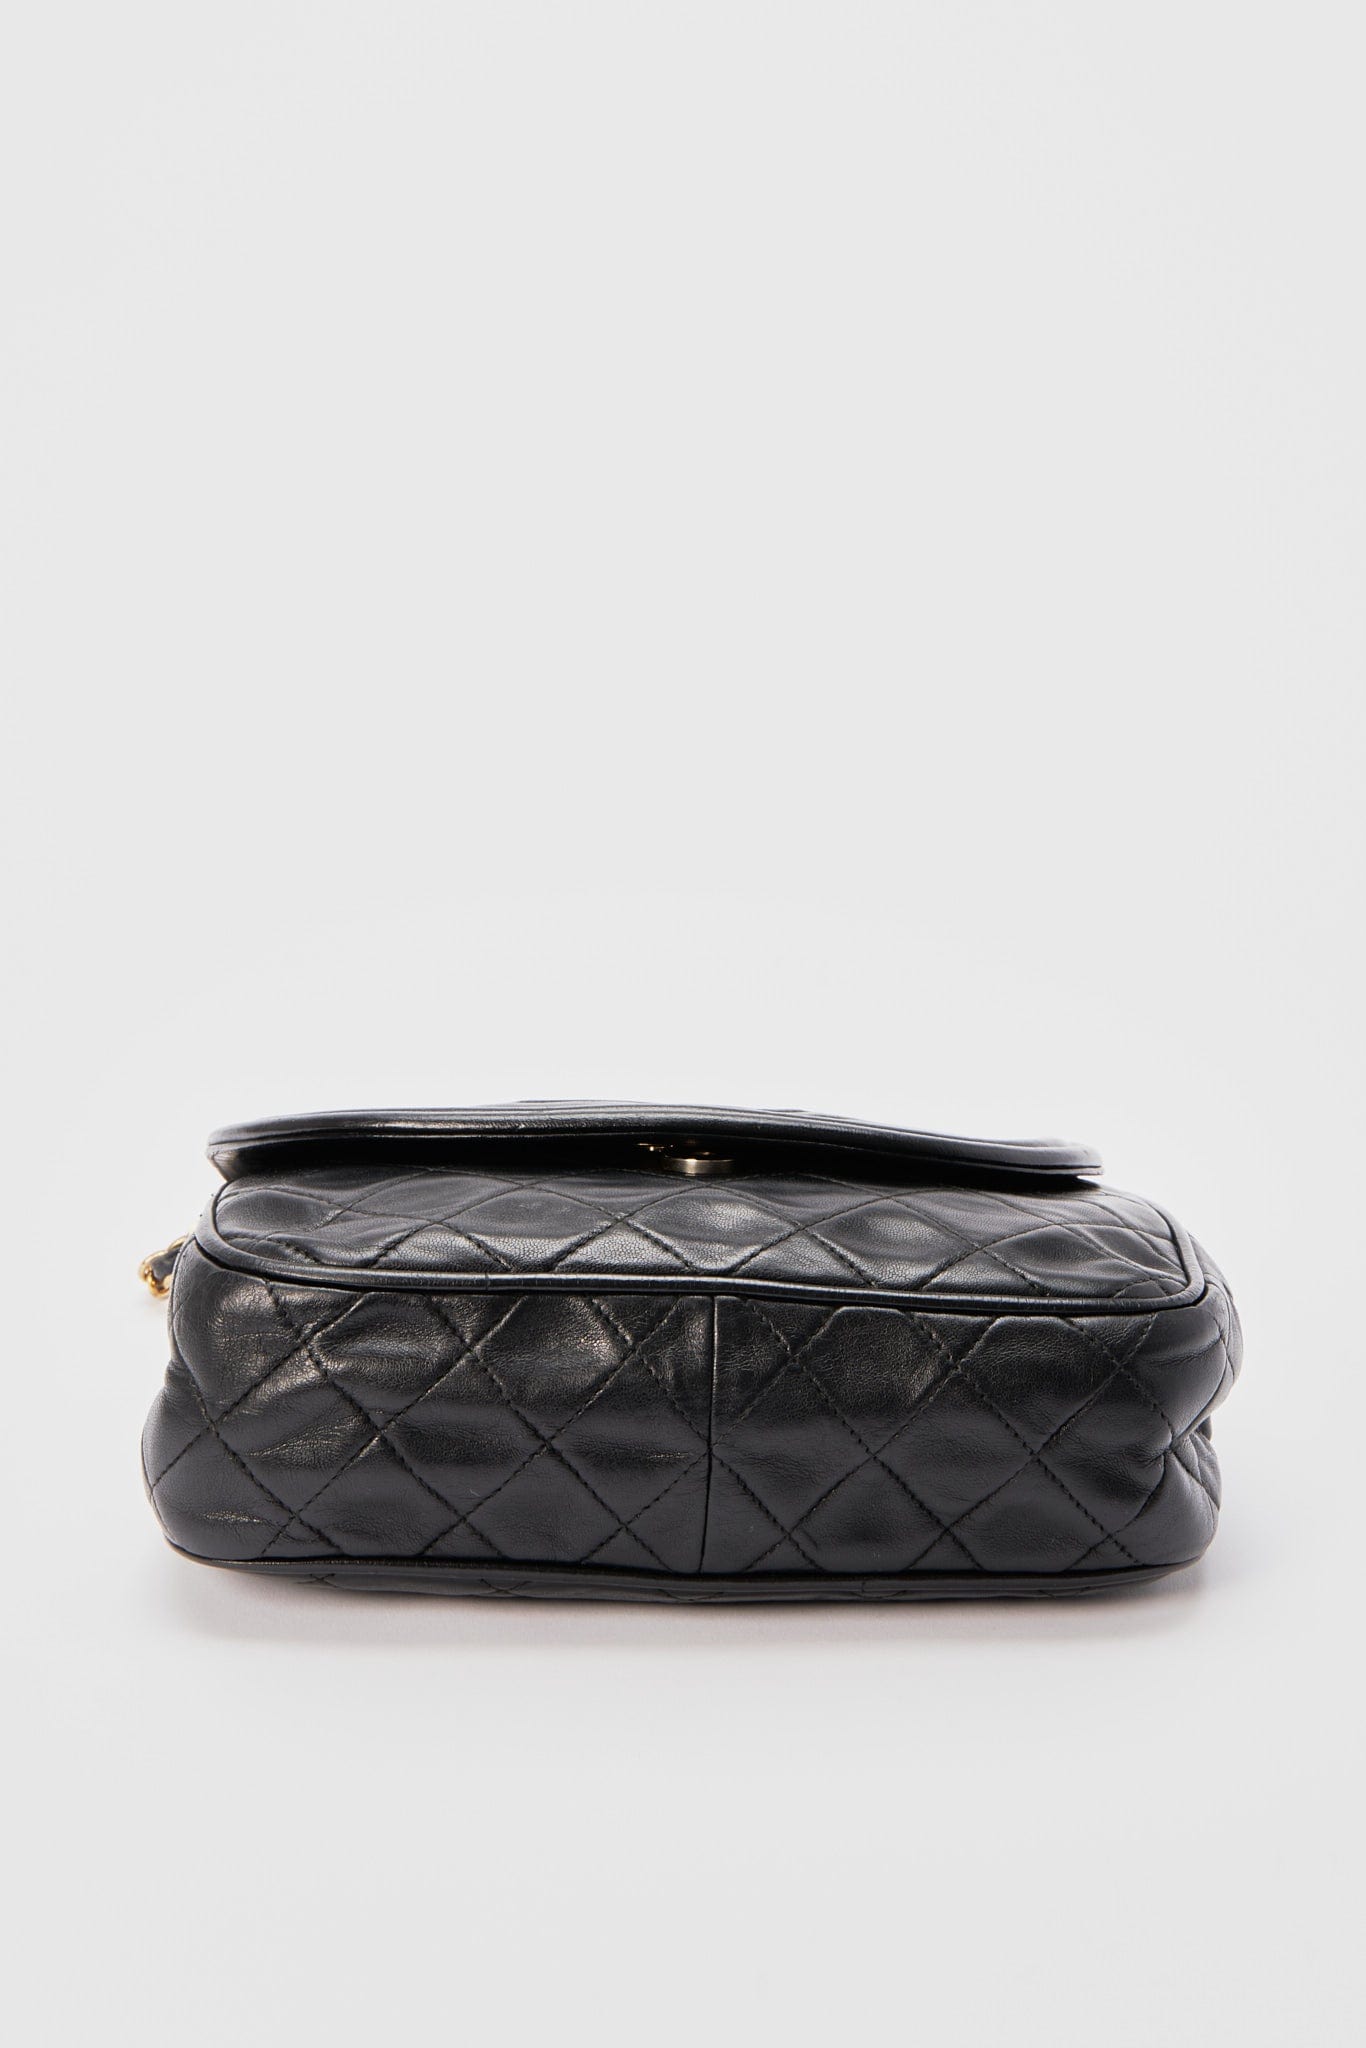 vintage chanel quilted purse crossbody